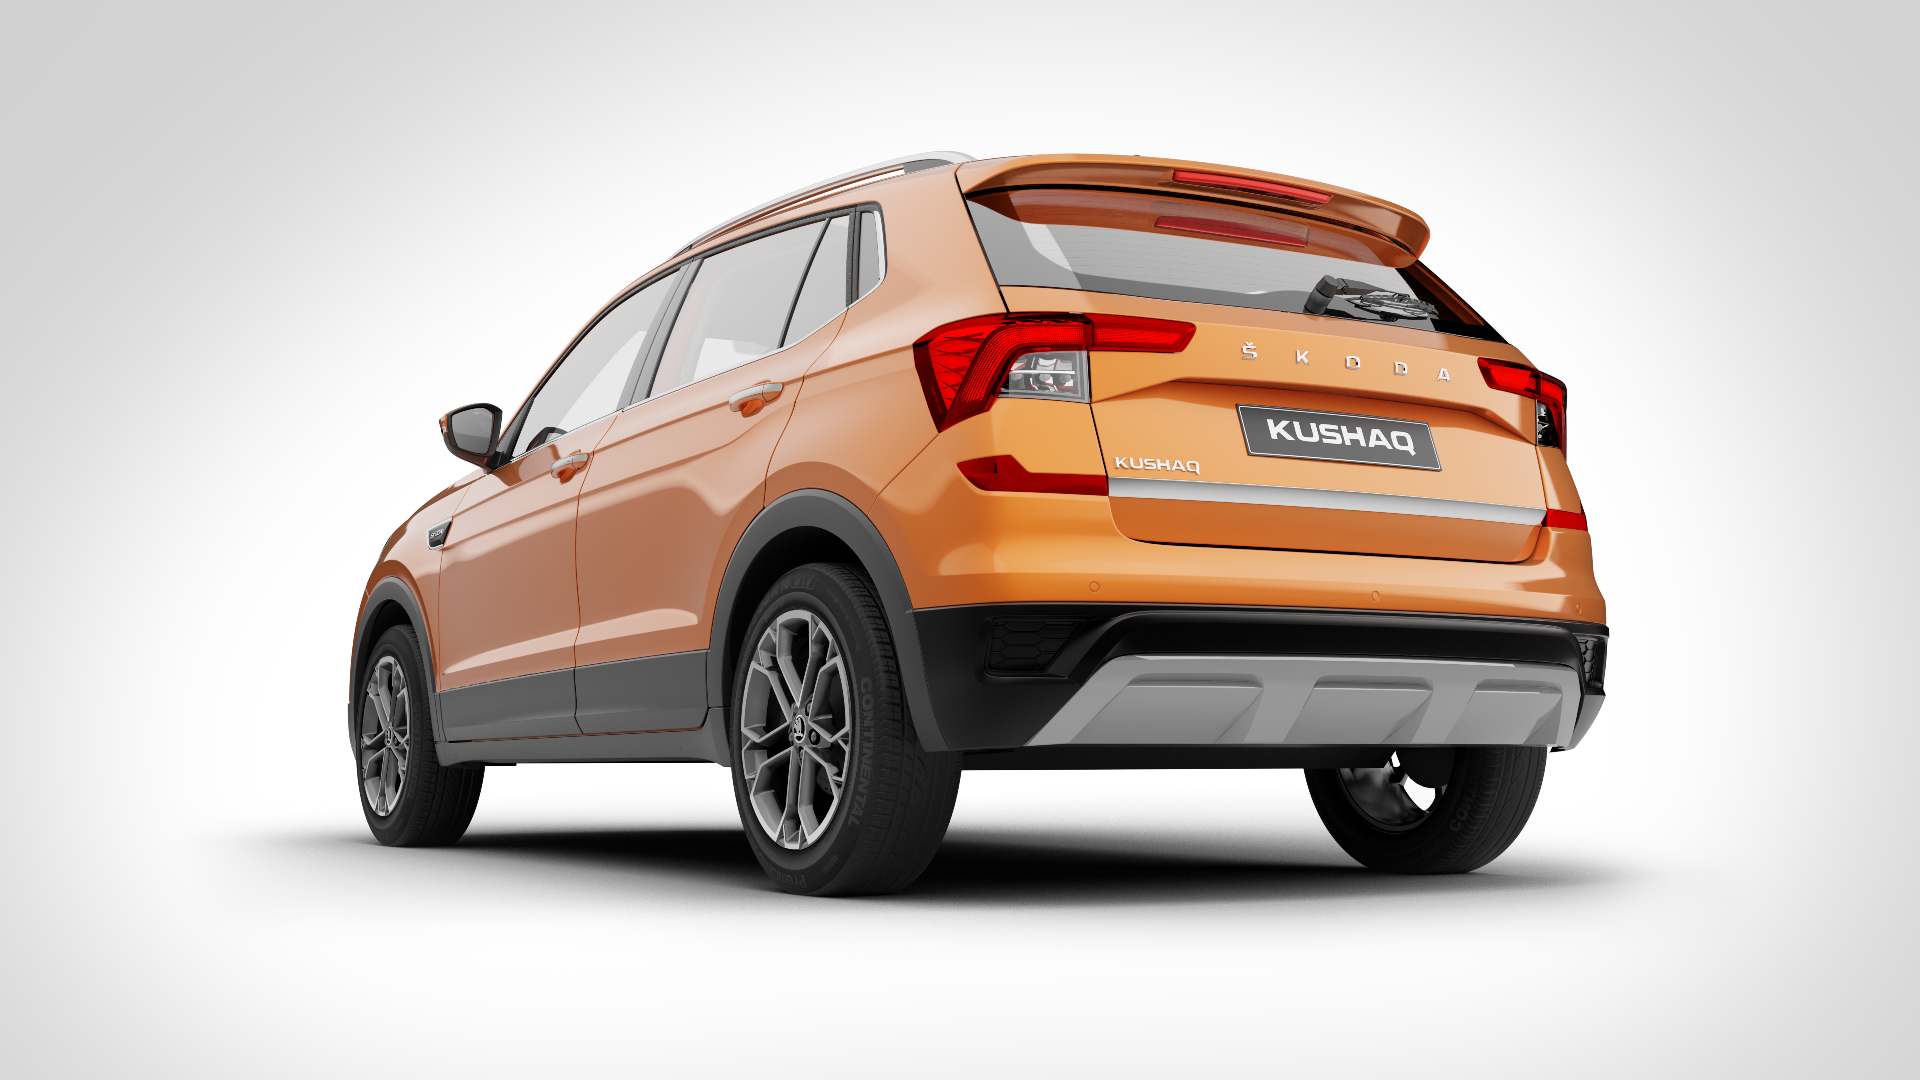 Ground clearance for the Skoda Kushaq is pegged at 188 mm. Image: Skoda